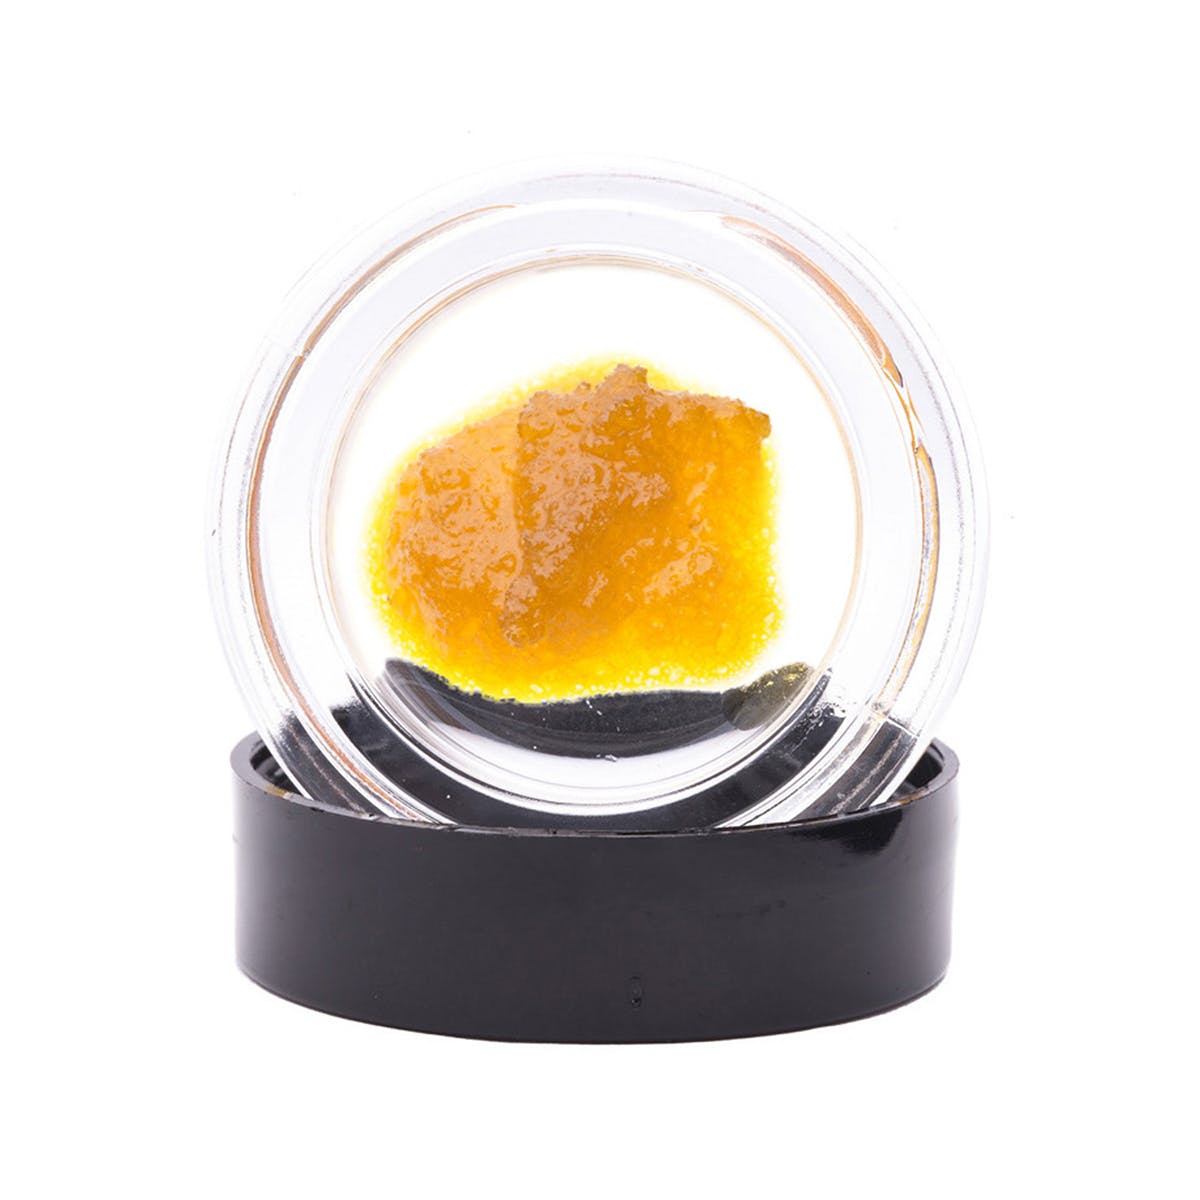 Underdawg Live Resin